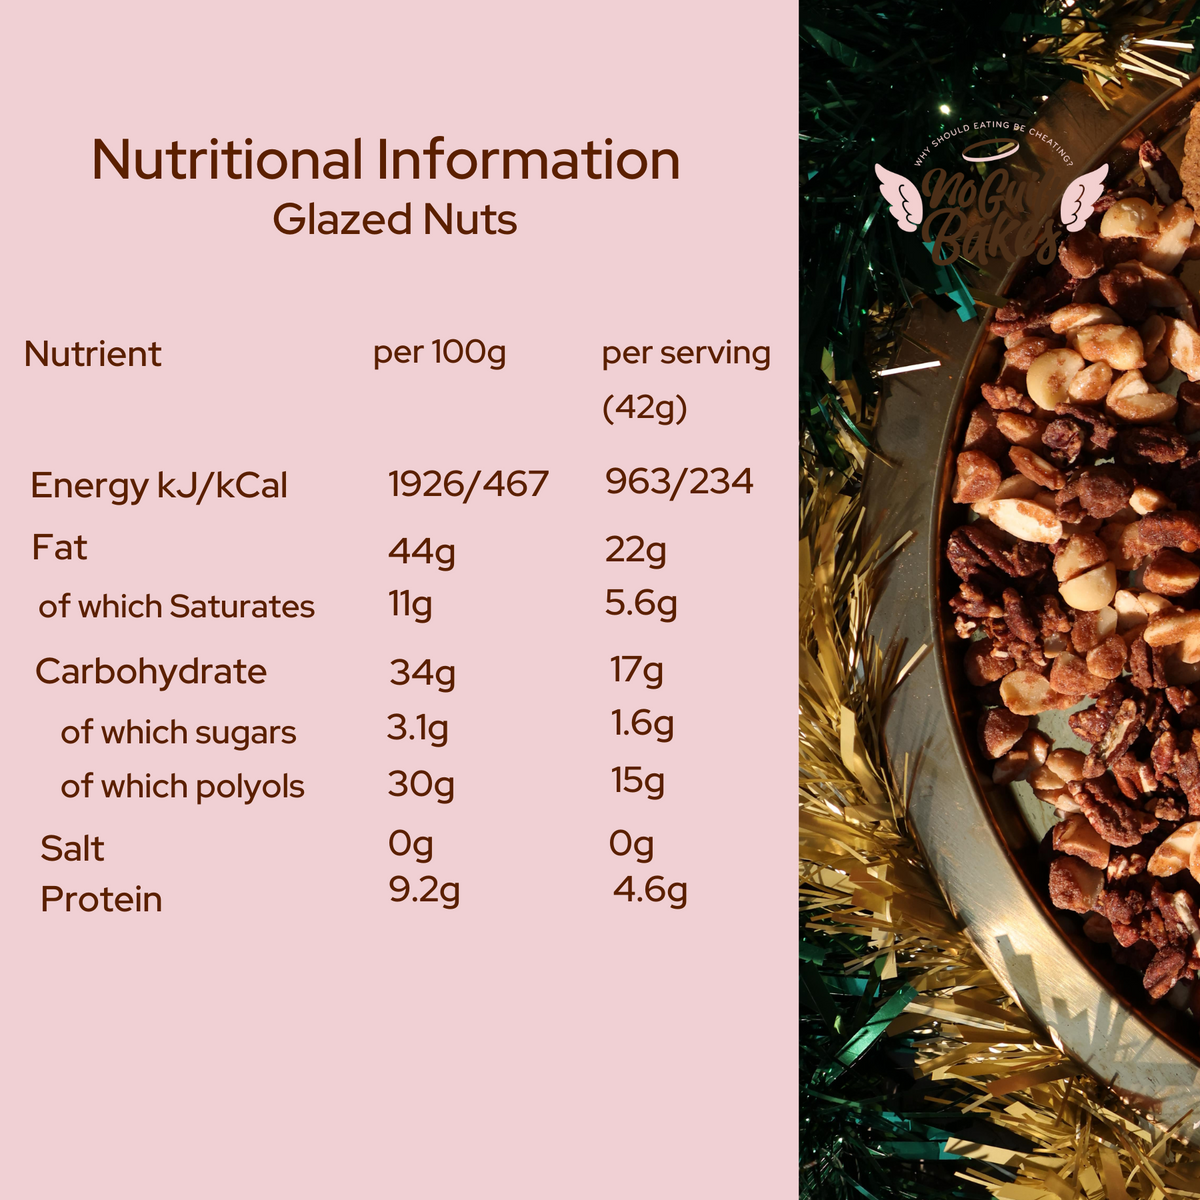 Glazed Nuts Nutritional facts